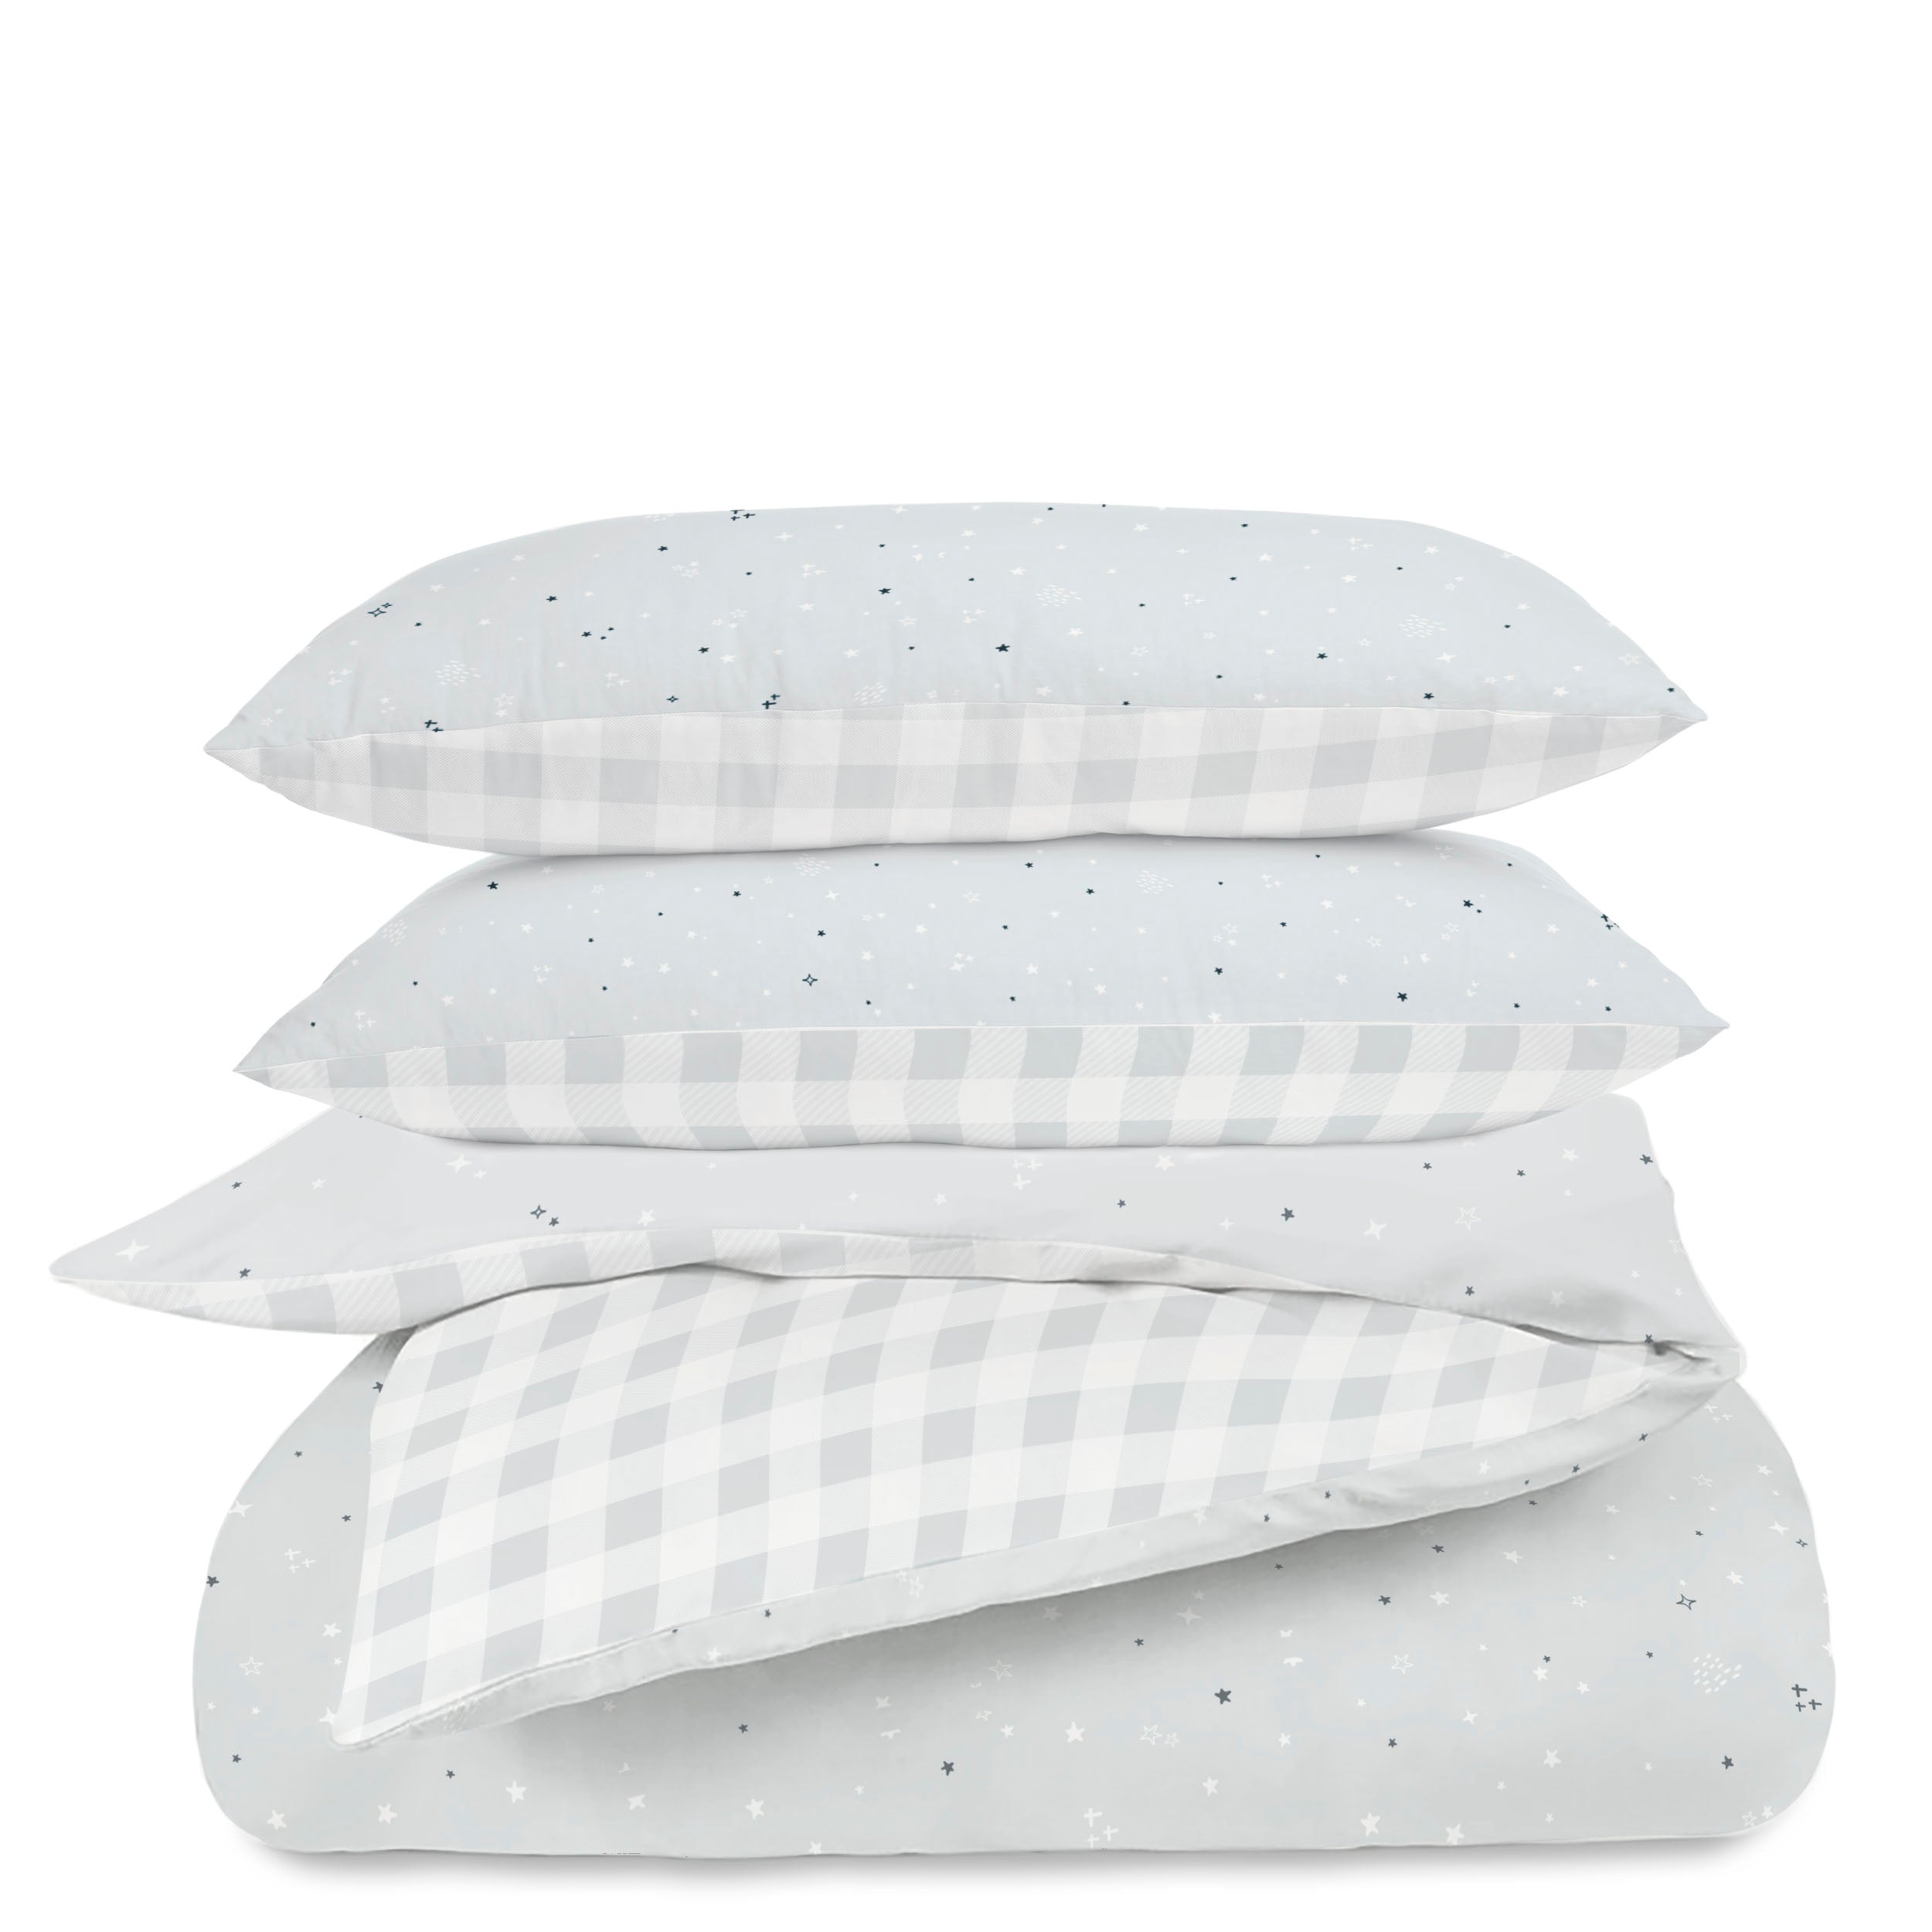 Four stacked pillows with different designs including polka dots, stars, and checkered patterns in shades of gray and white on a white background.